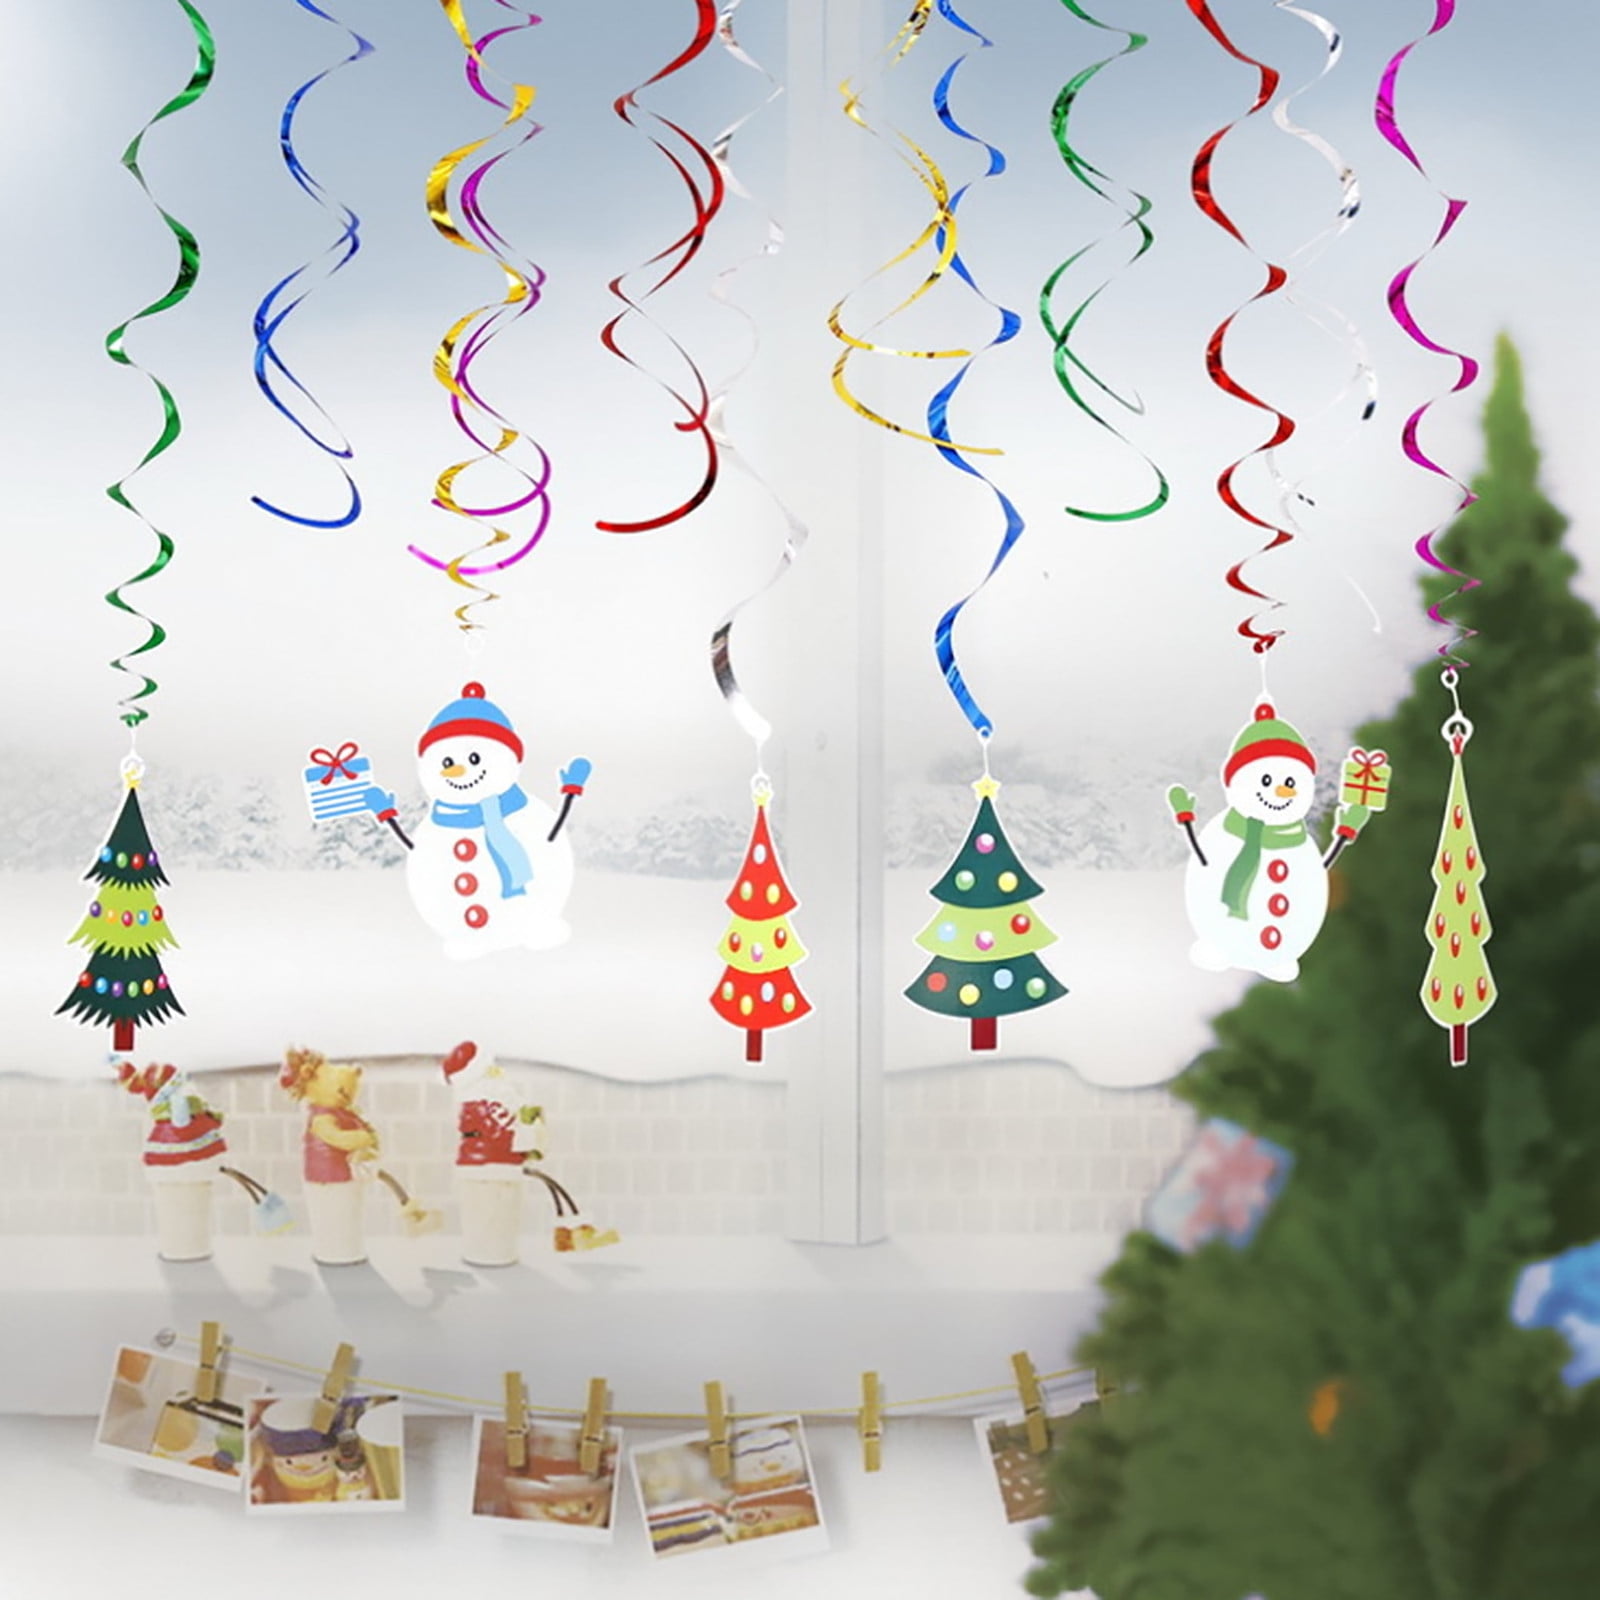 30 Pieces Christmas Hanging Foil Swirl Decorations Set Xmas Holiday Snowman Elk Sign Hanging Swirls Ceiling Decorations for Indoor Outdoor Happy Christmas Holiday Party Decoration Supplies 